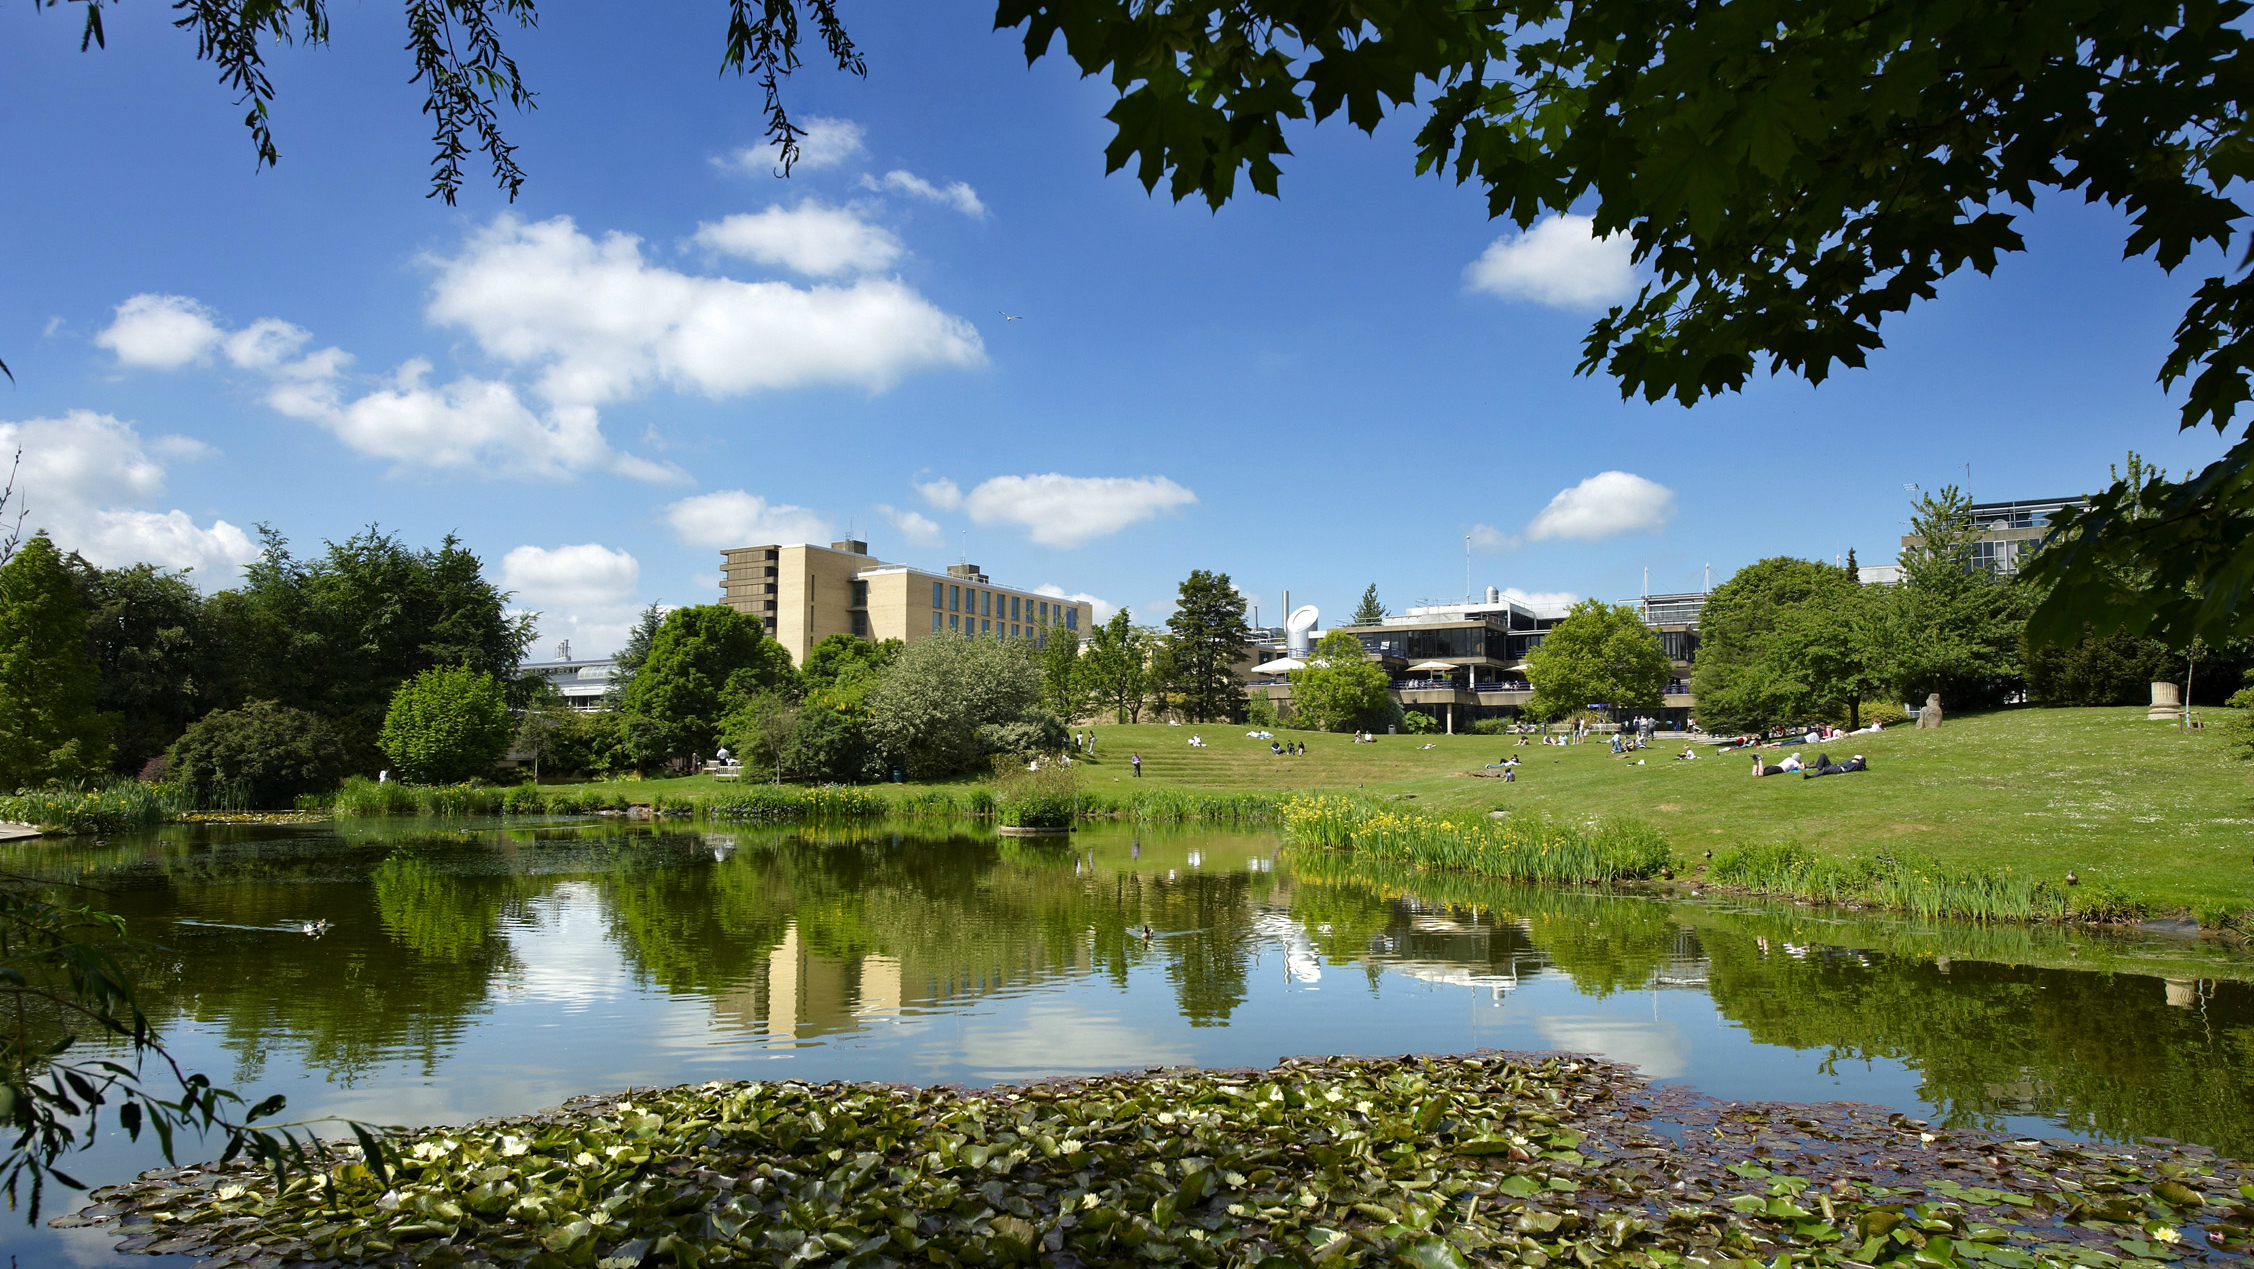 The University of Bath has been ranked 13th in The Times and The Sunday Times Good University Guide 2019.